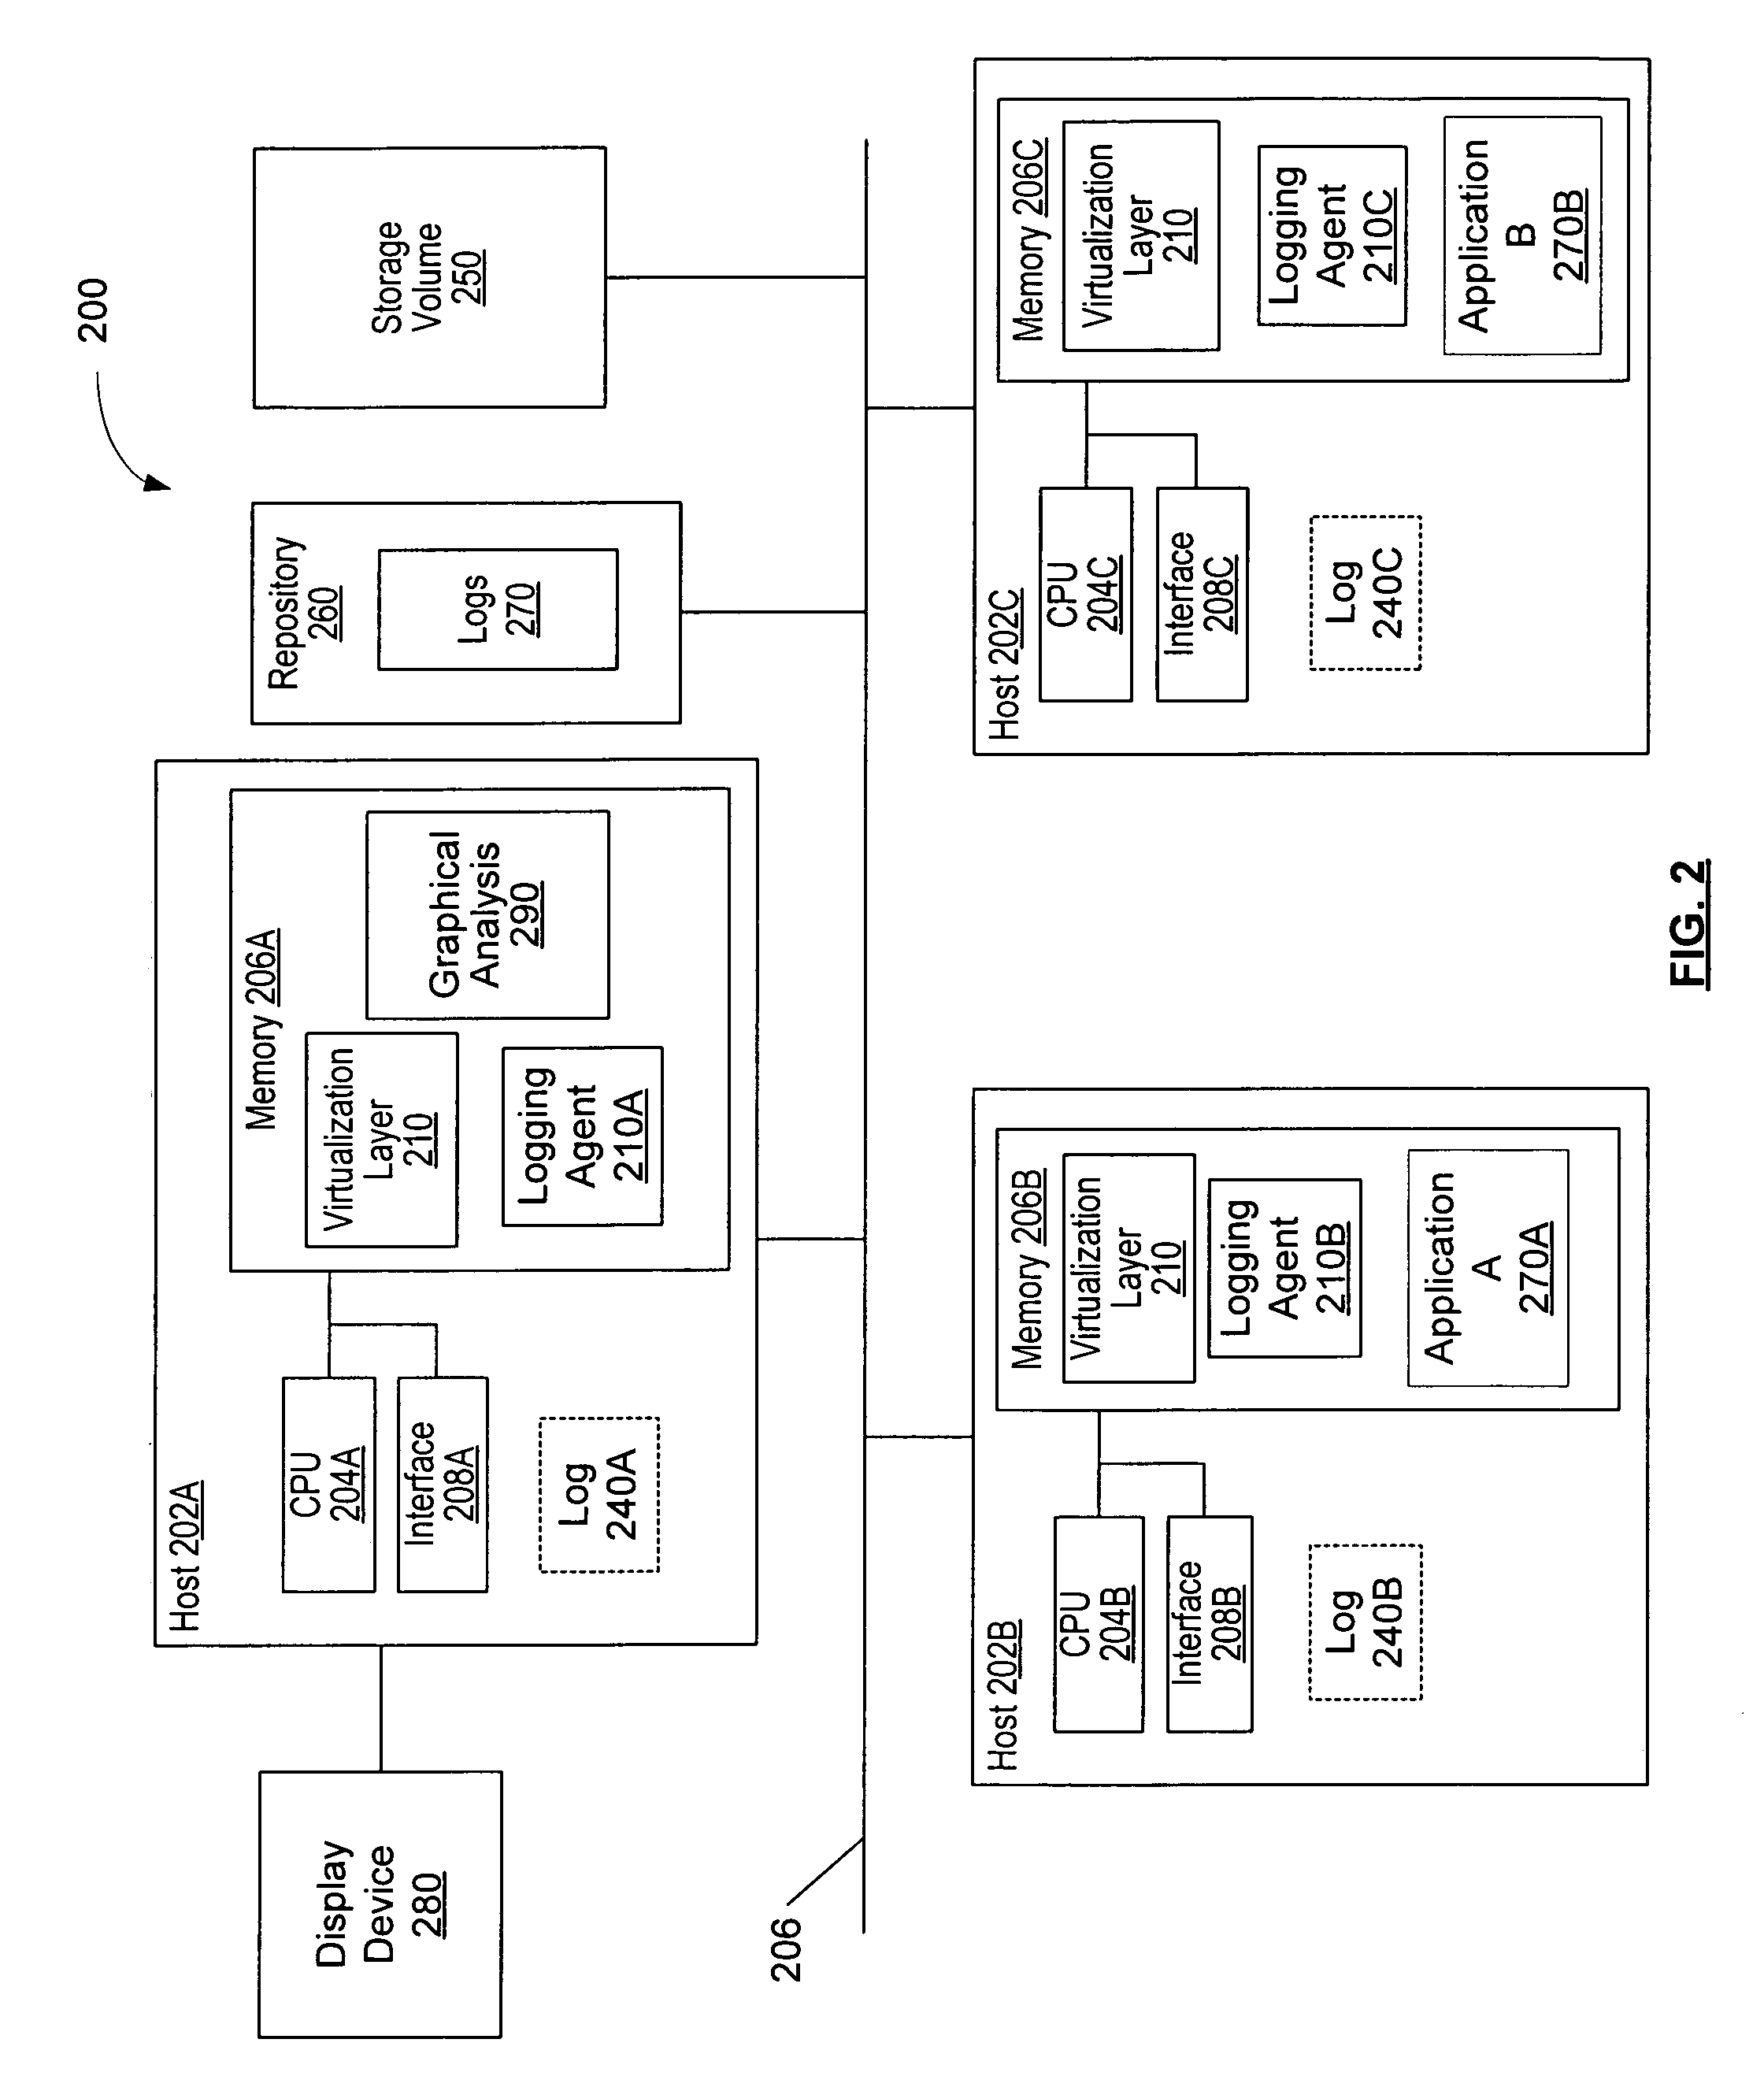 Graphical analysis of states in a computing system